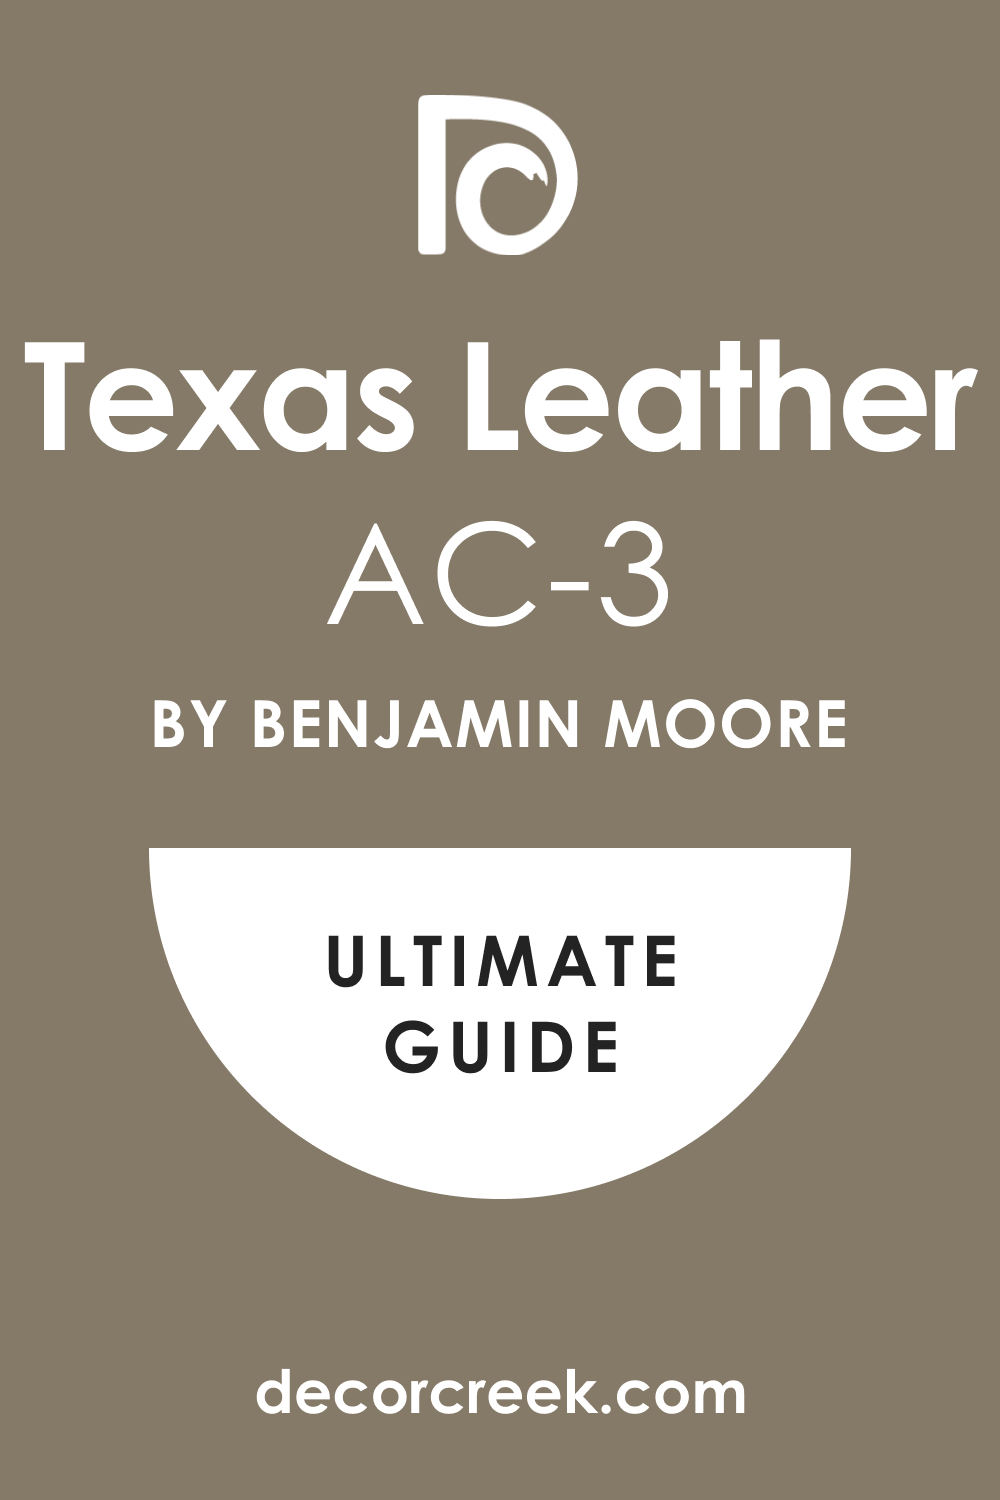 Ultimate Guide of Texas Leather AC-3 